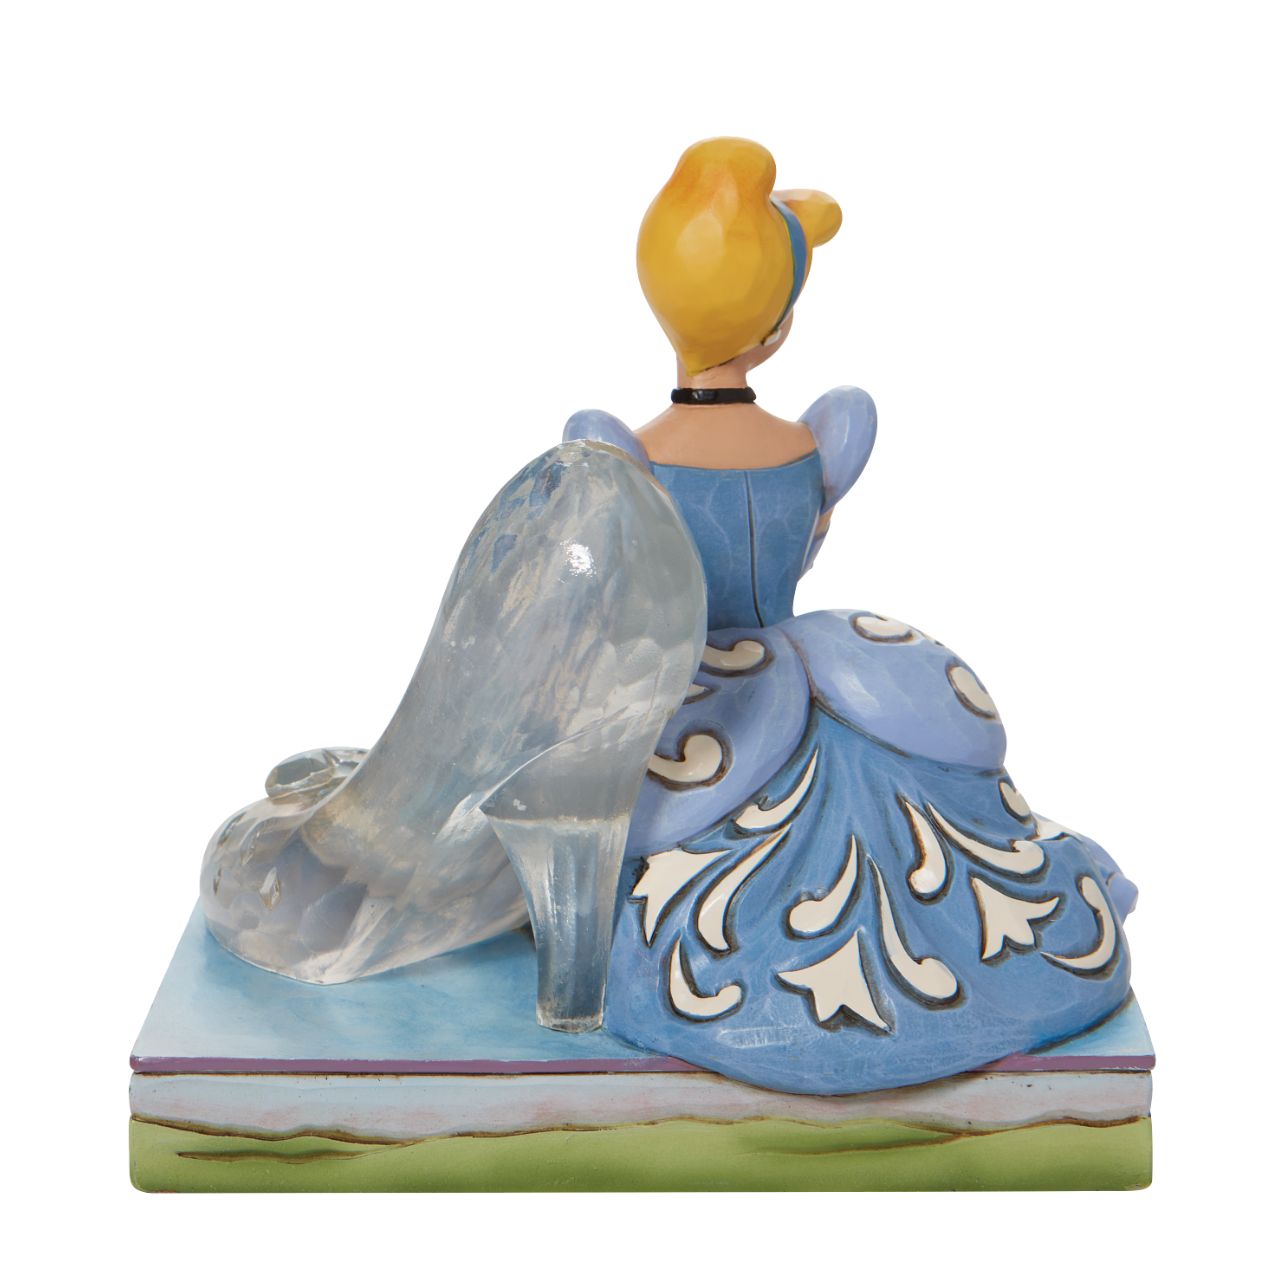 Jim Shore Disney Cinderella Glass Slipper Figurine  This Disney Traditions line by Jim Shore features iconic Walt Disney princesses with their famous props highlighted. With a base illustrating her story, this piece features Cinderella in her brilliant blue gown with a glass slipper.